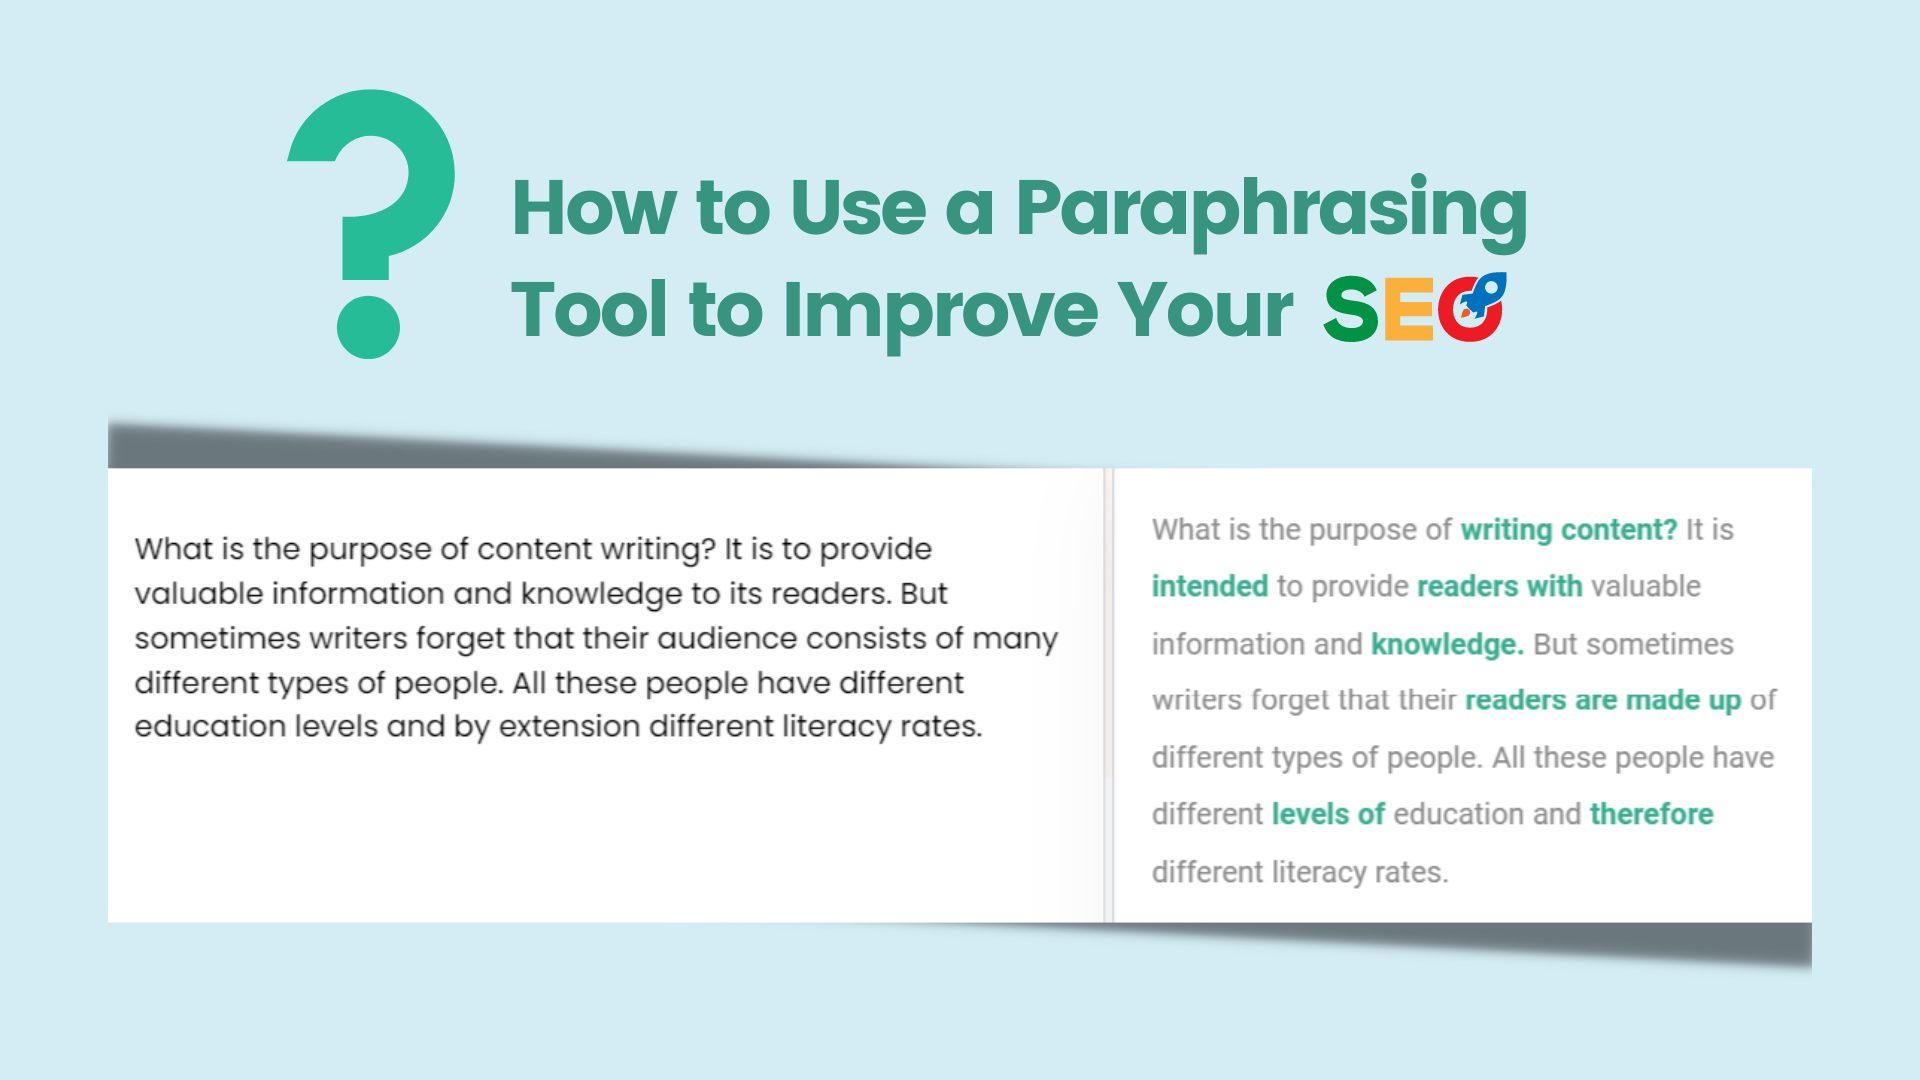 How to Use a Paraphrasing Tool to Improve Your